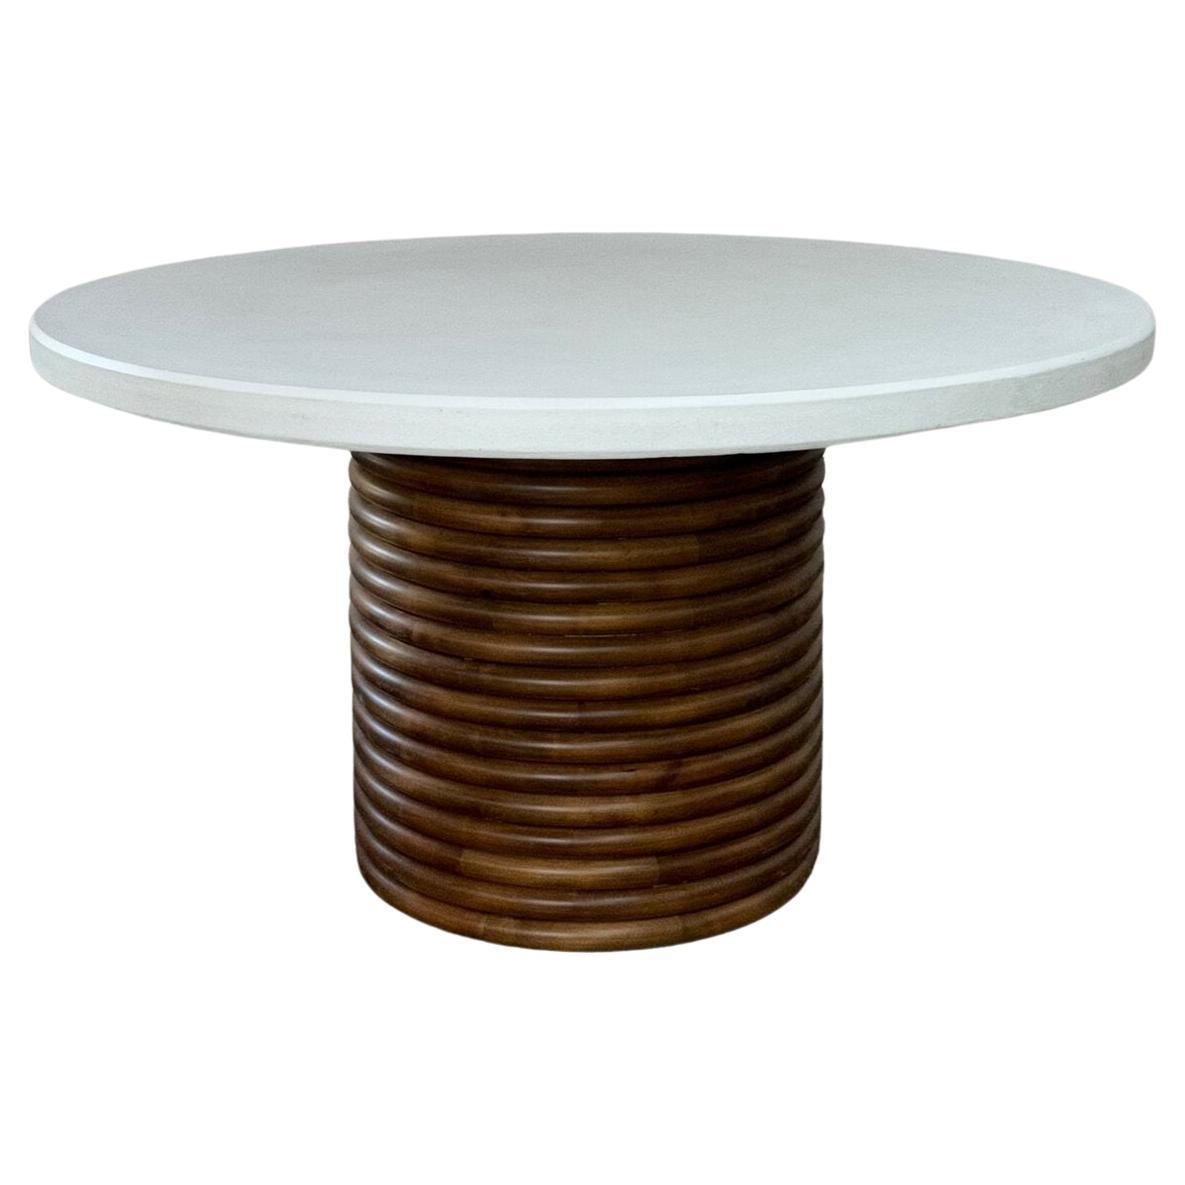 Capas table handcrafted